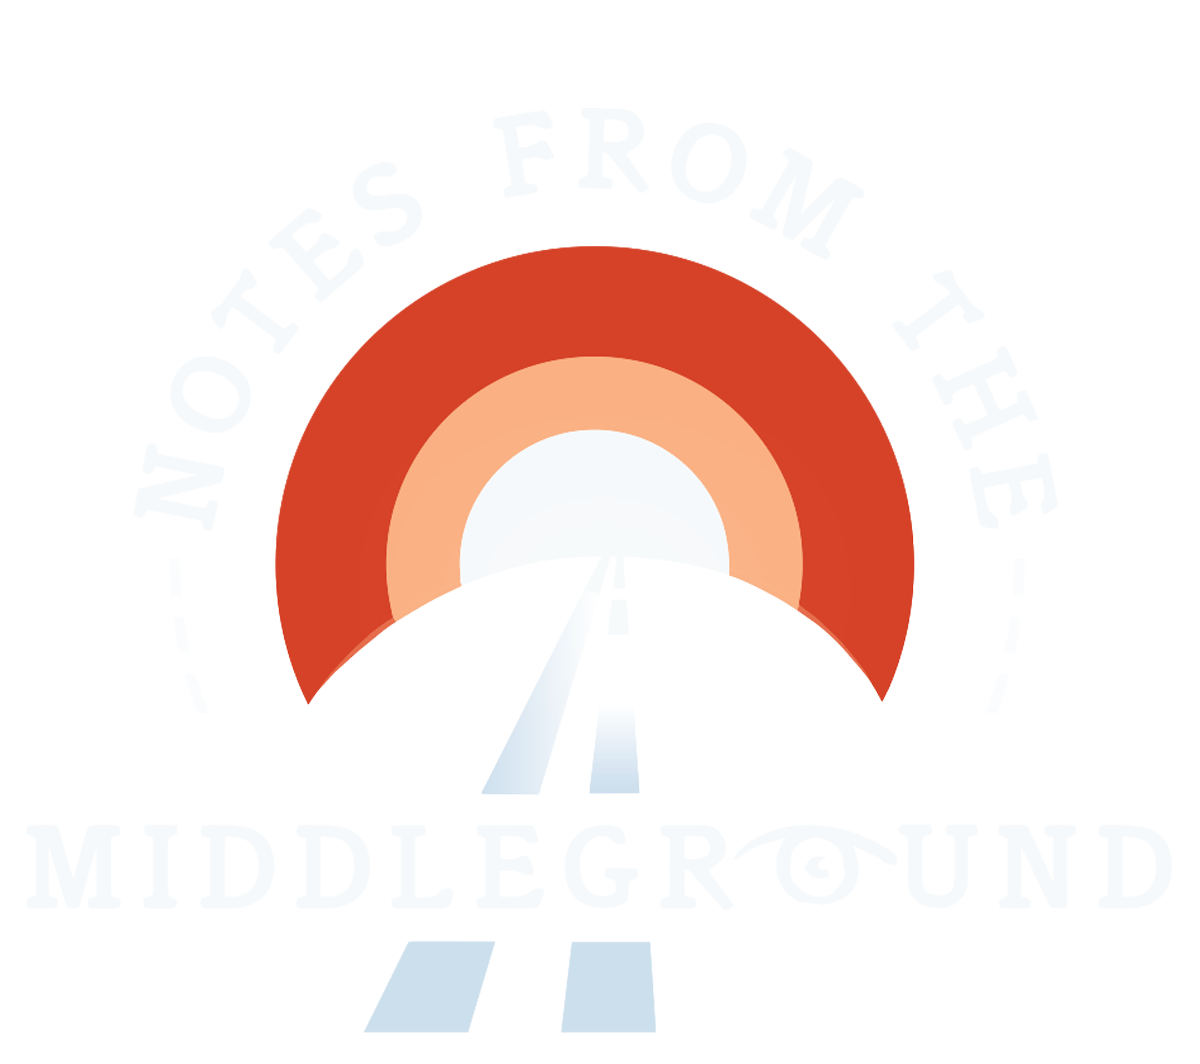 Notes from the Middleground